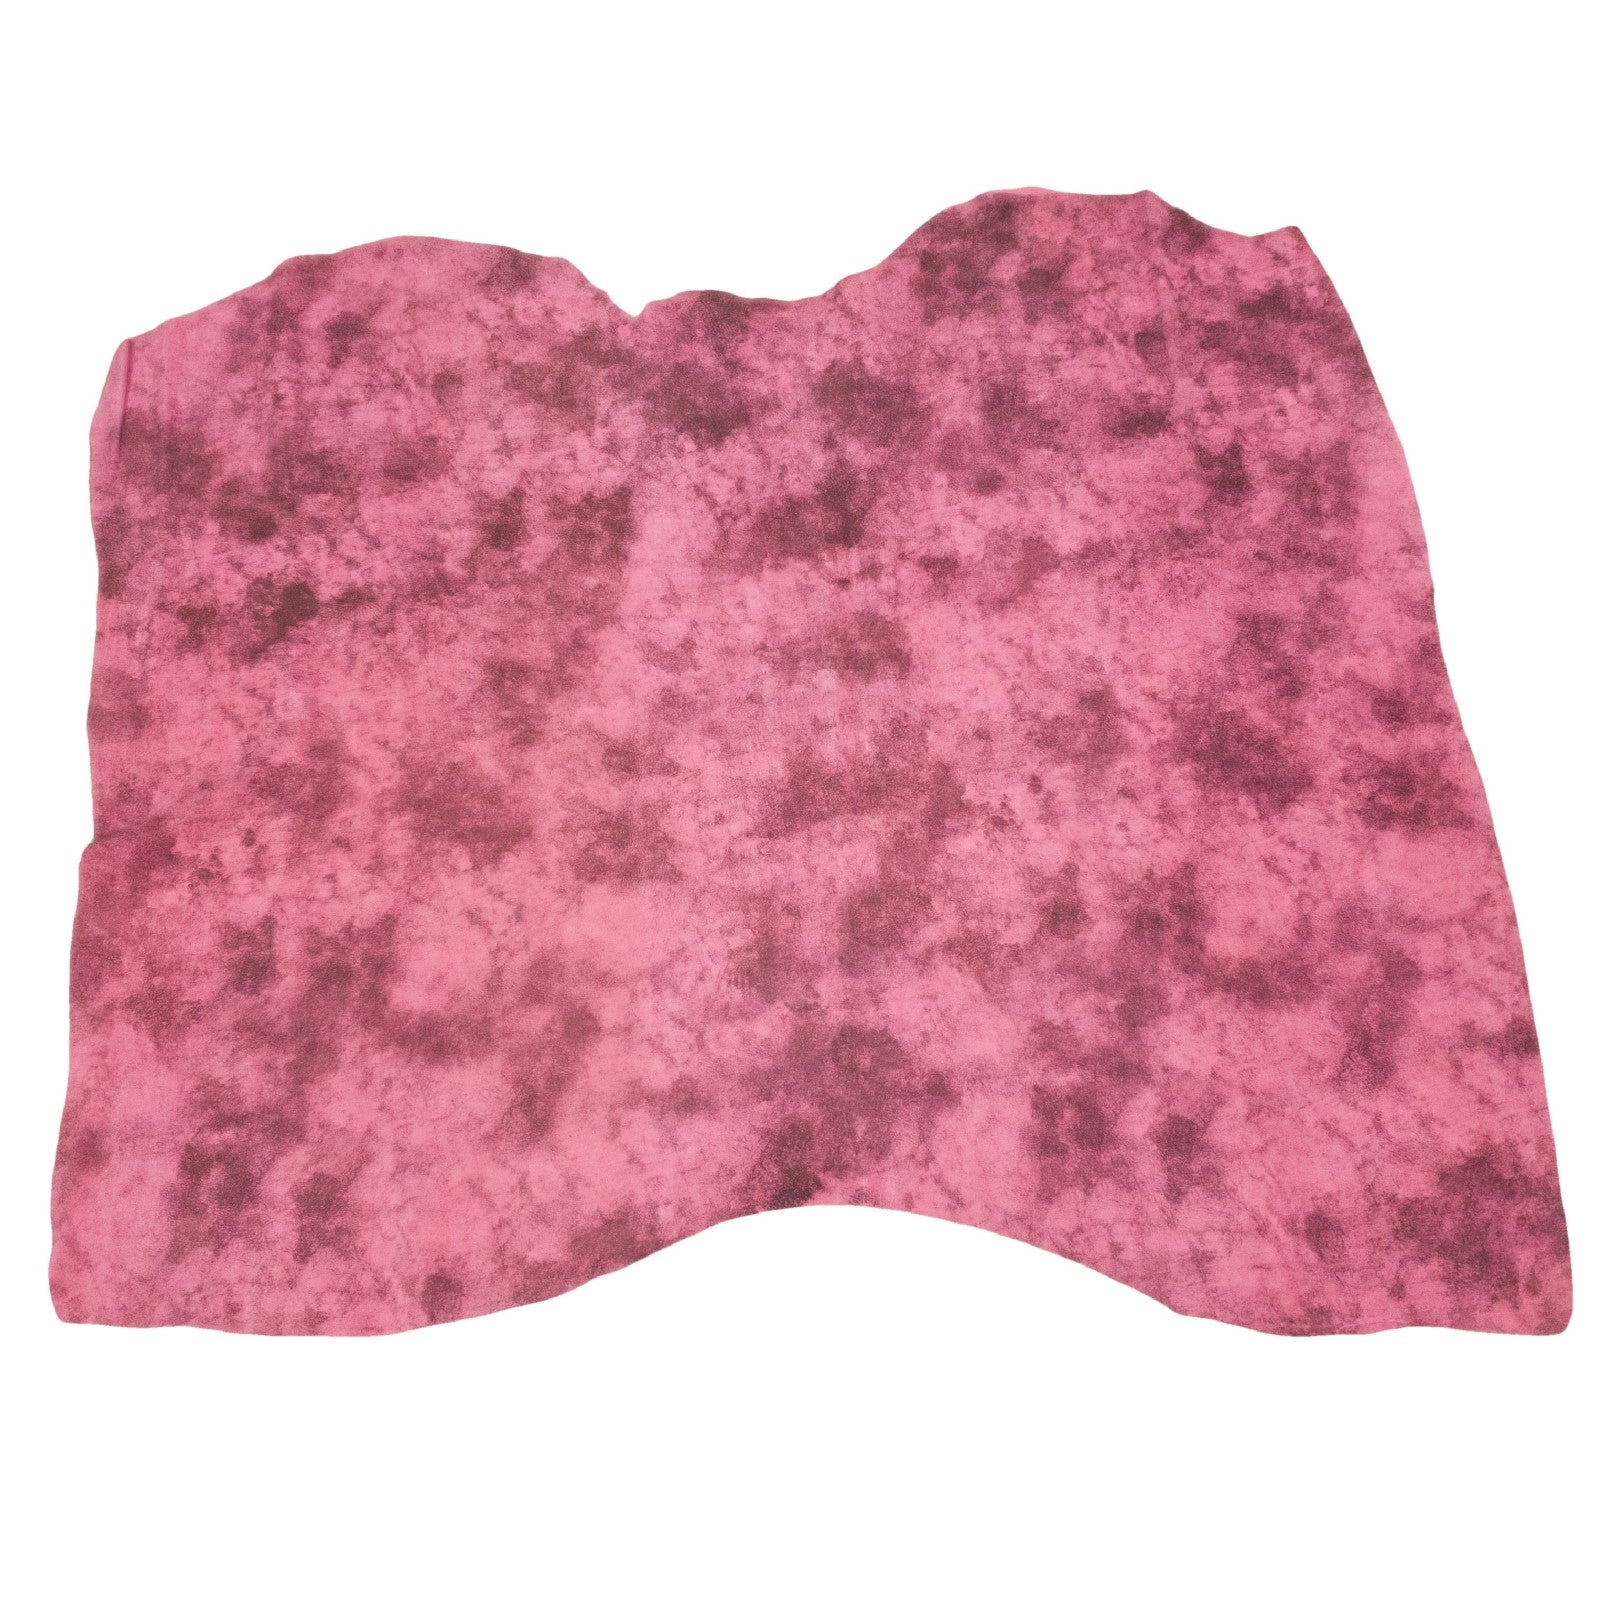 Scuba Suede, 3-4 oz, 8-17 sq ft, Cow Sides, Pink / 15-17 Sq Ft | The Leather Guy